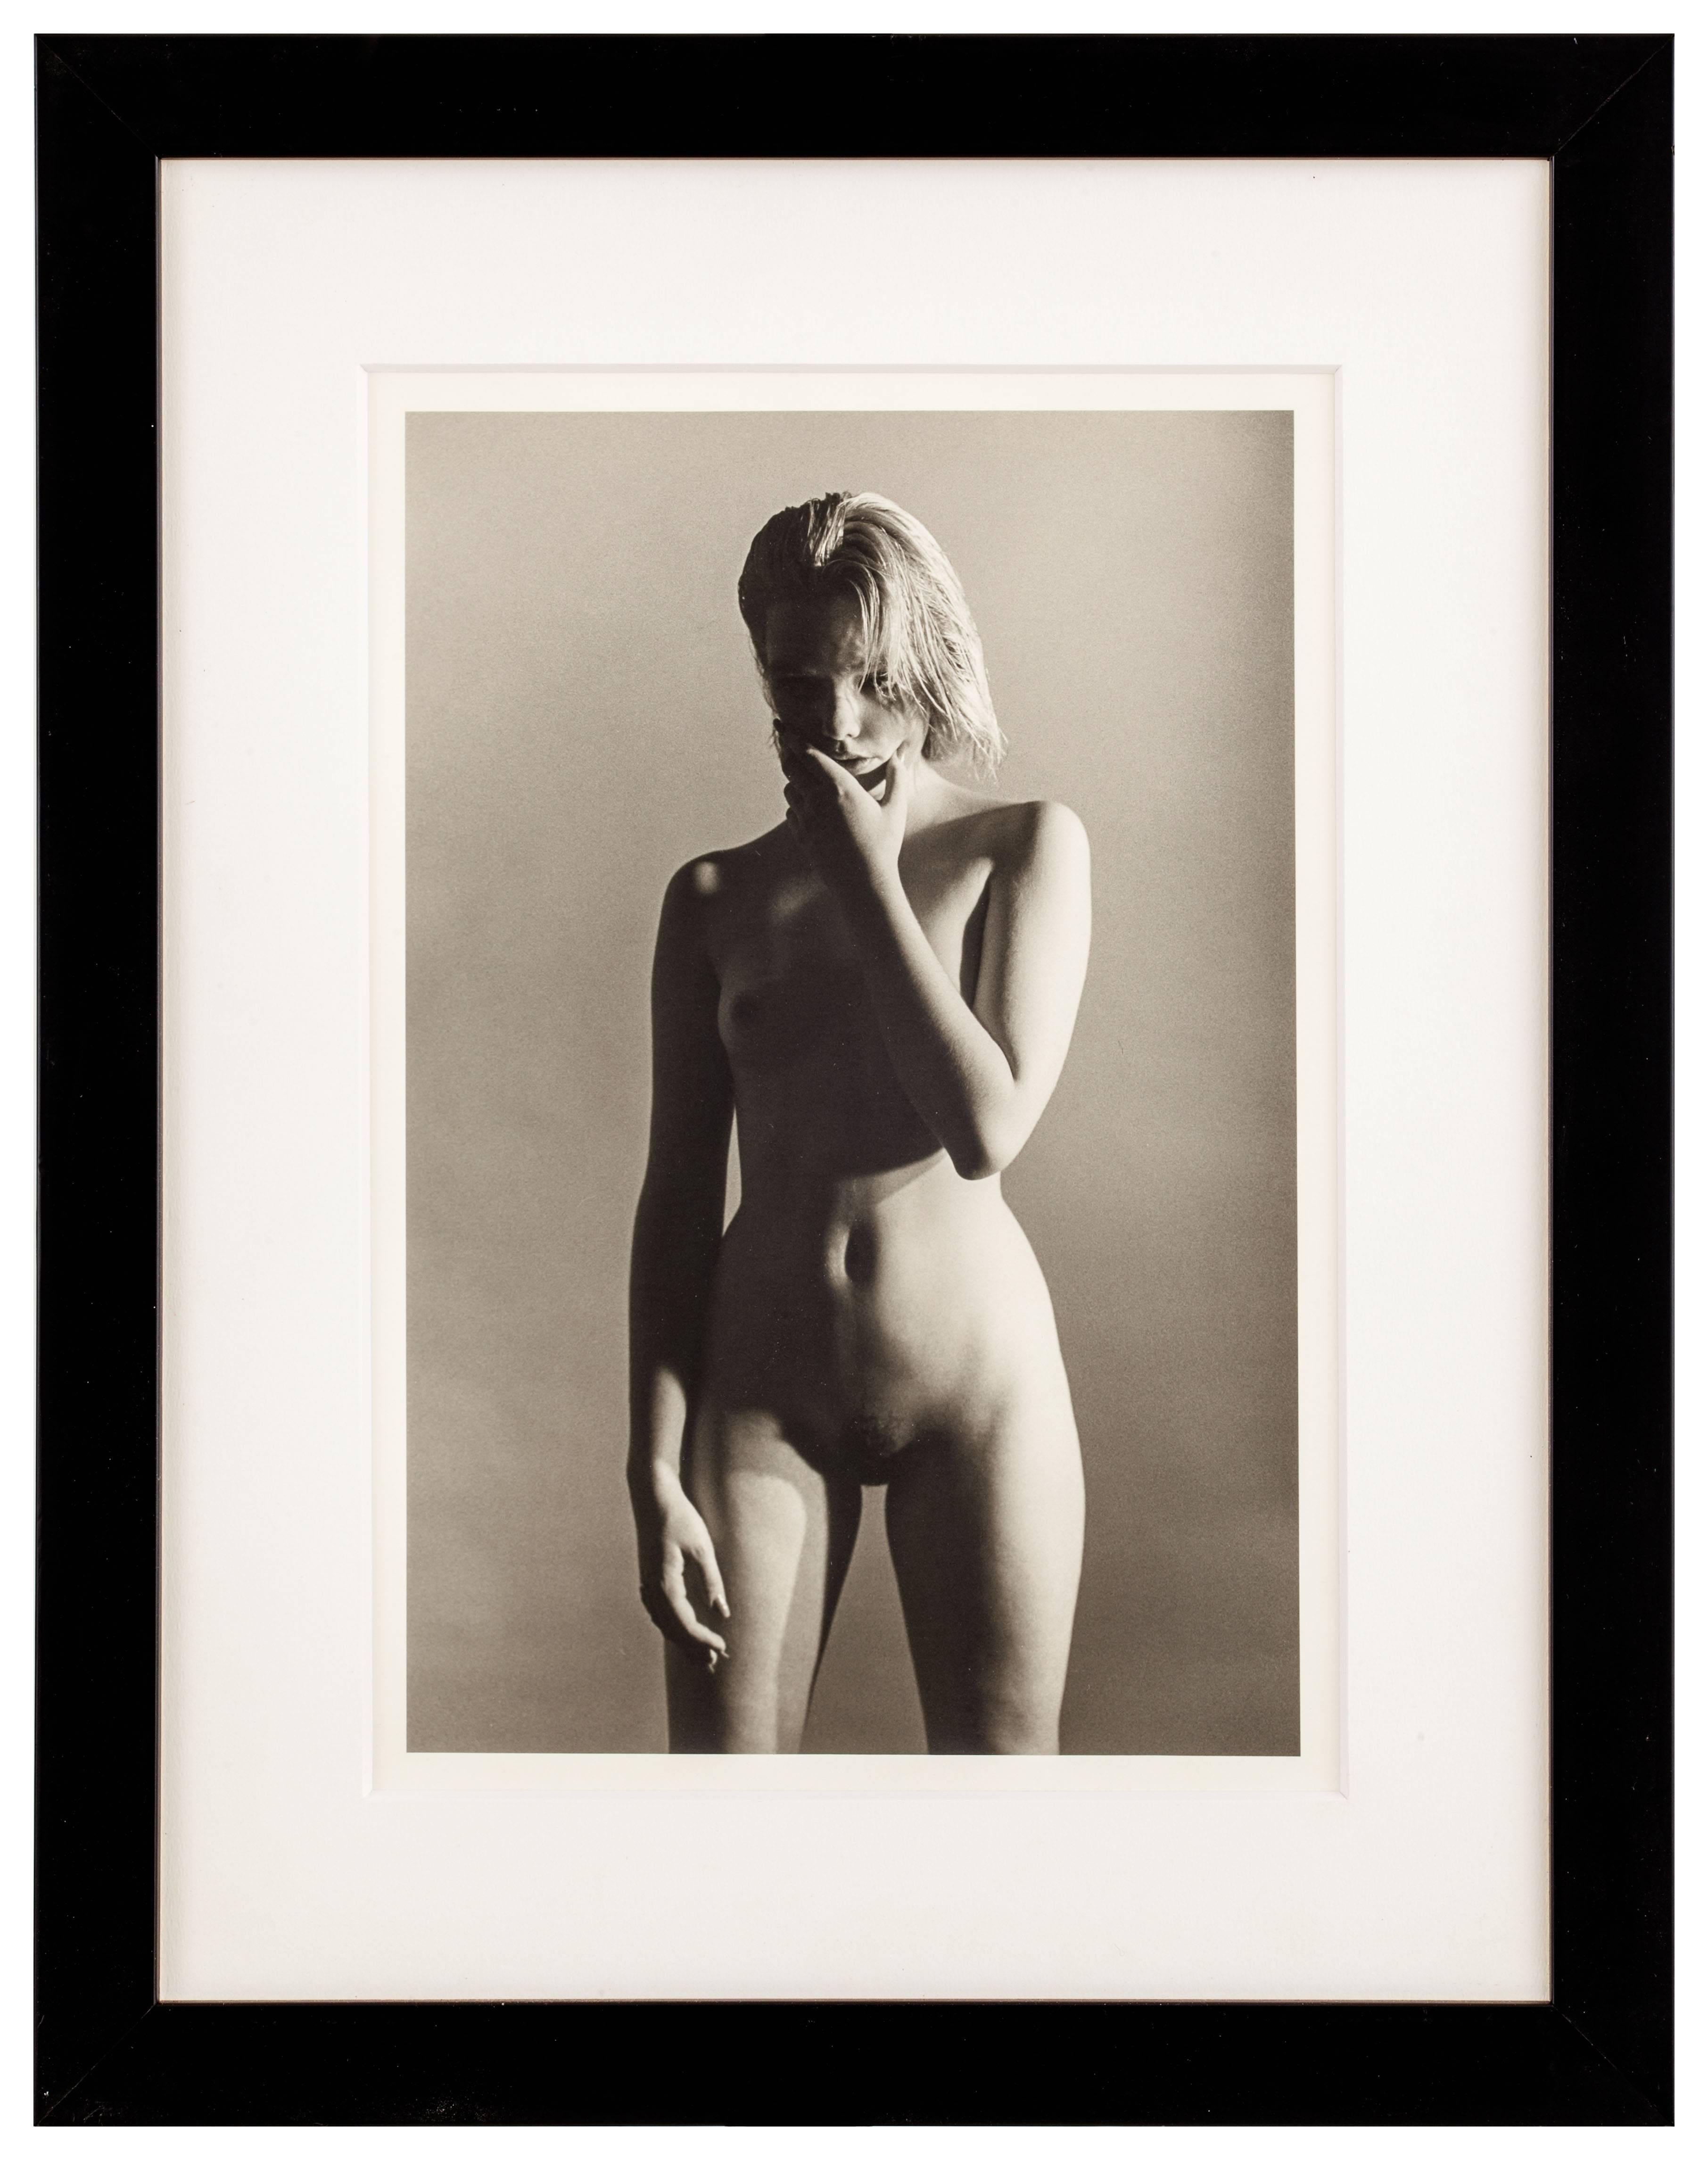 Nude by Lupino, New York 1984. Black & white Fashion modern photography - Photograph by Stephan Lupino